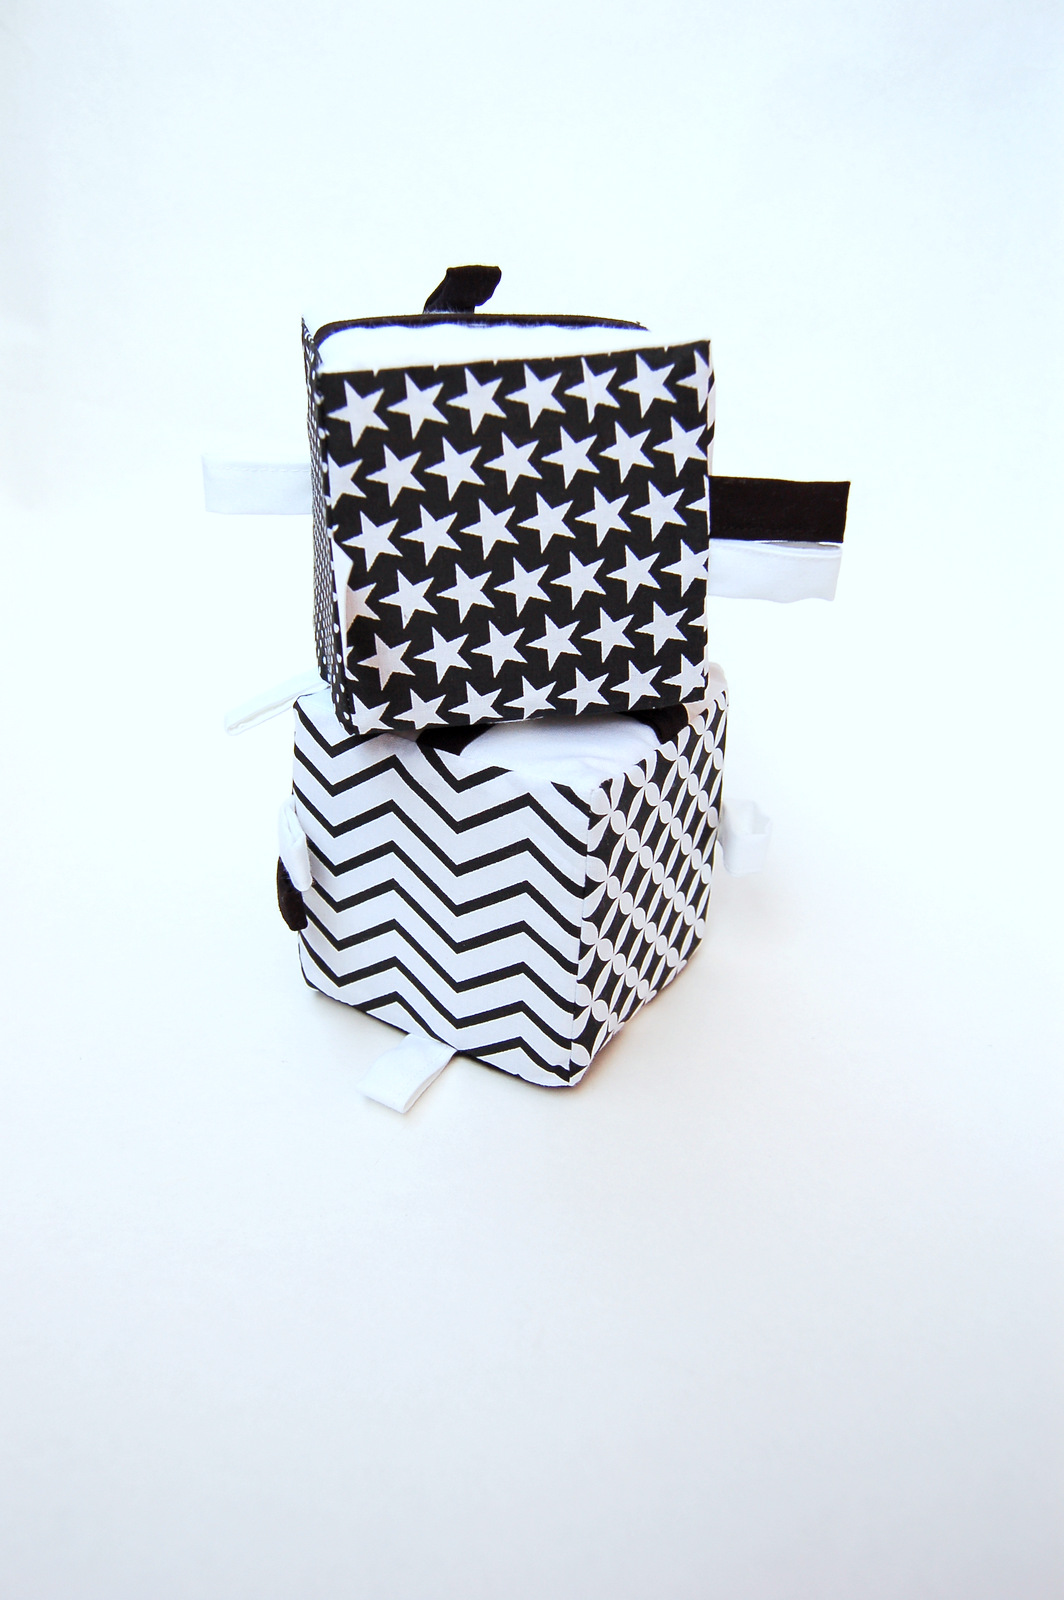 MyMoo Busy Cube - Black And White,MyMoo Busy Cube - Black And White